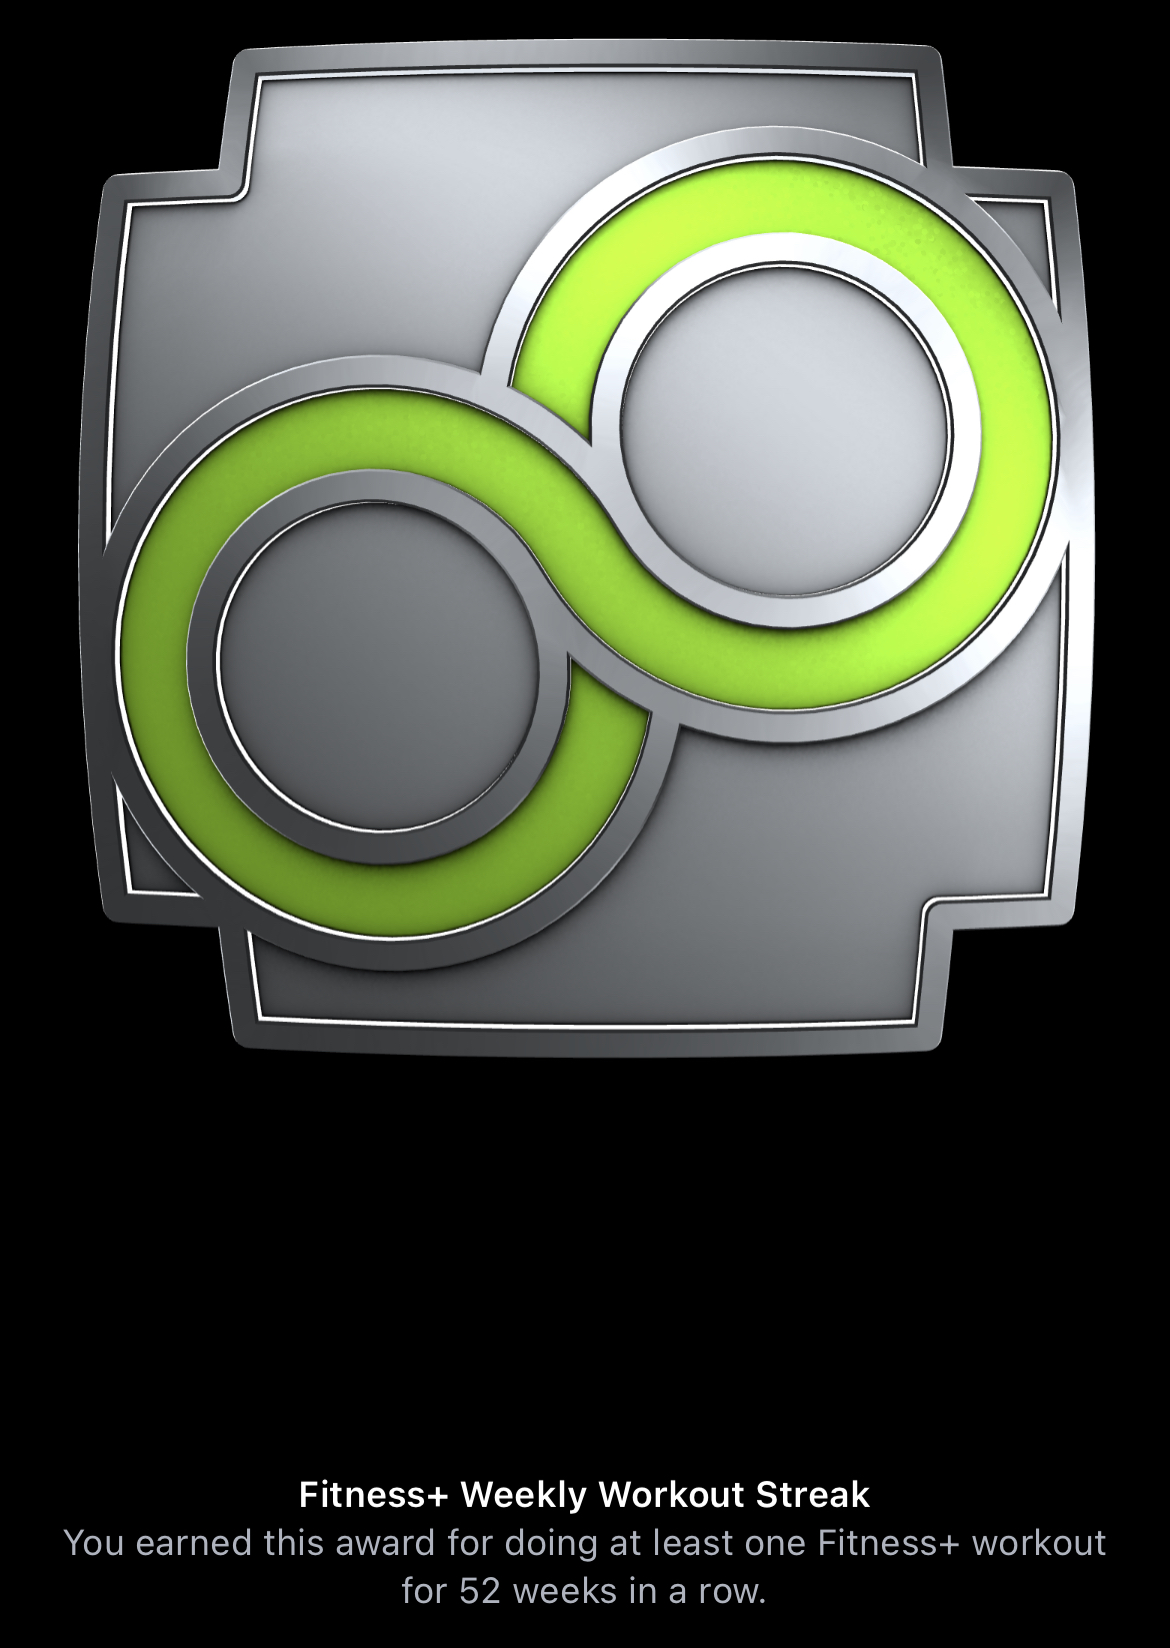 Apple Fitness Plus award for 52 consecutive weeks of at least one workout per week